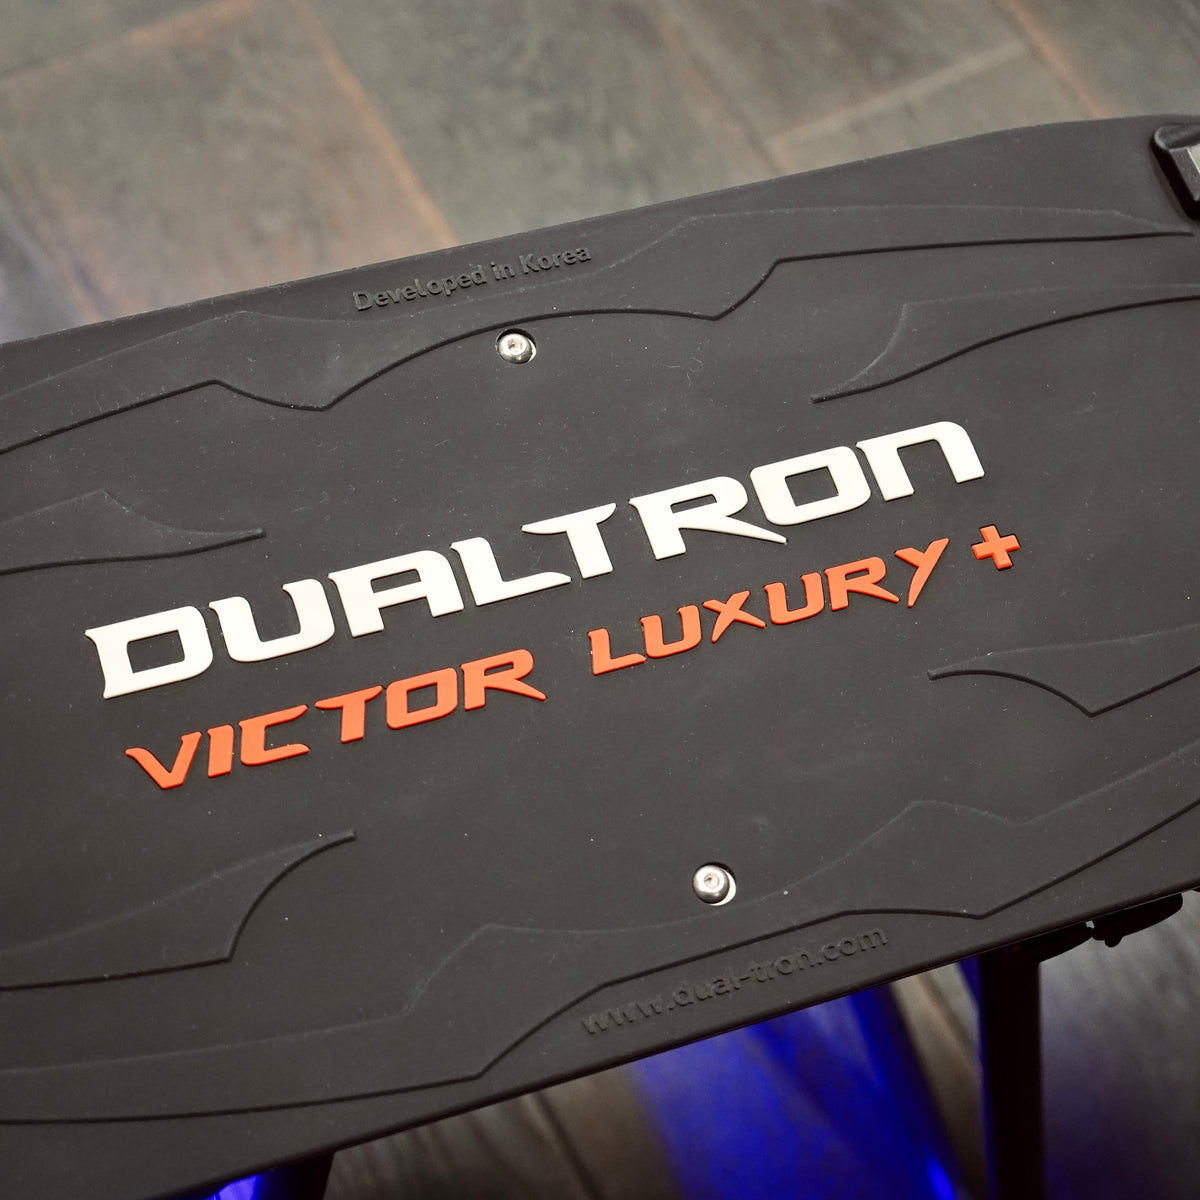 Dualtron Victor Luxury - MiniMotors Electric Scooter